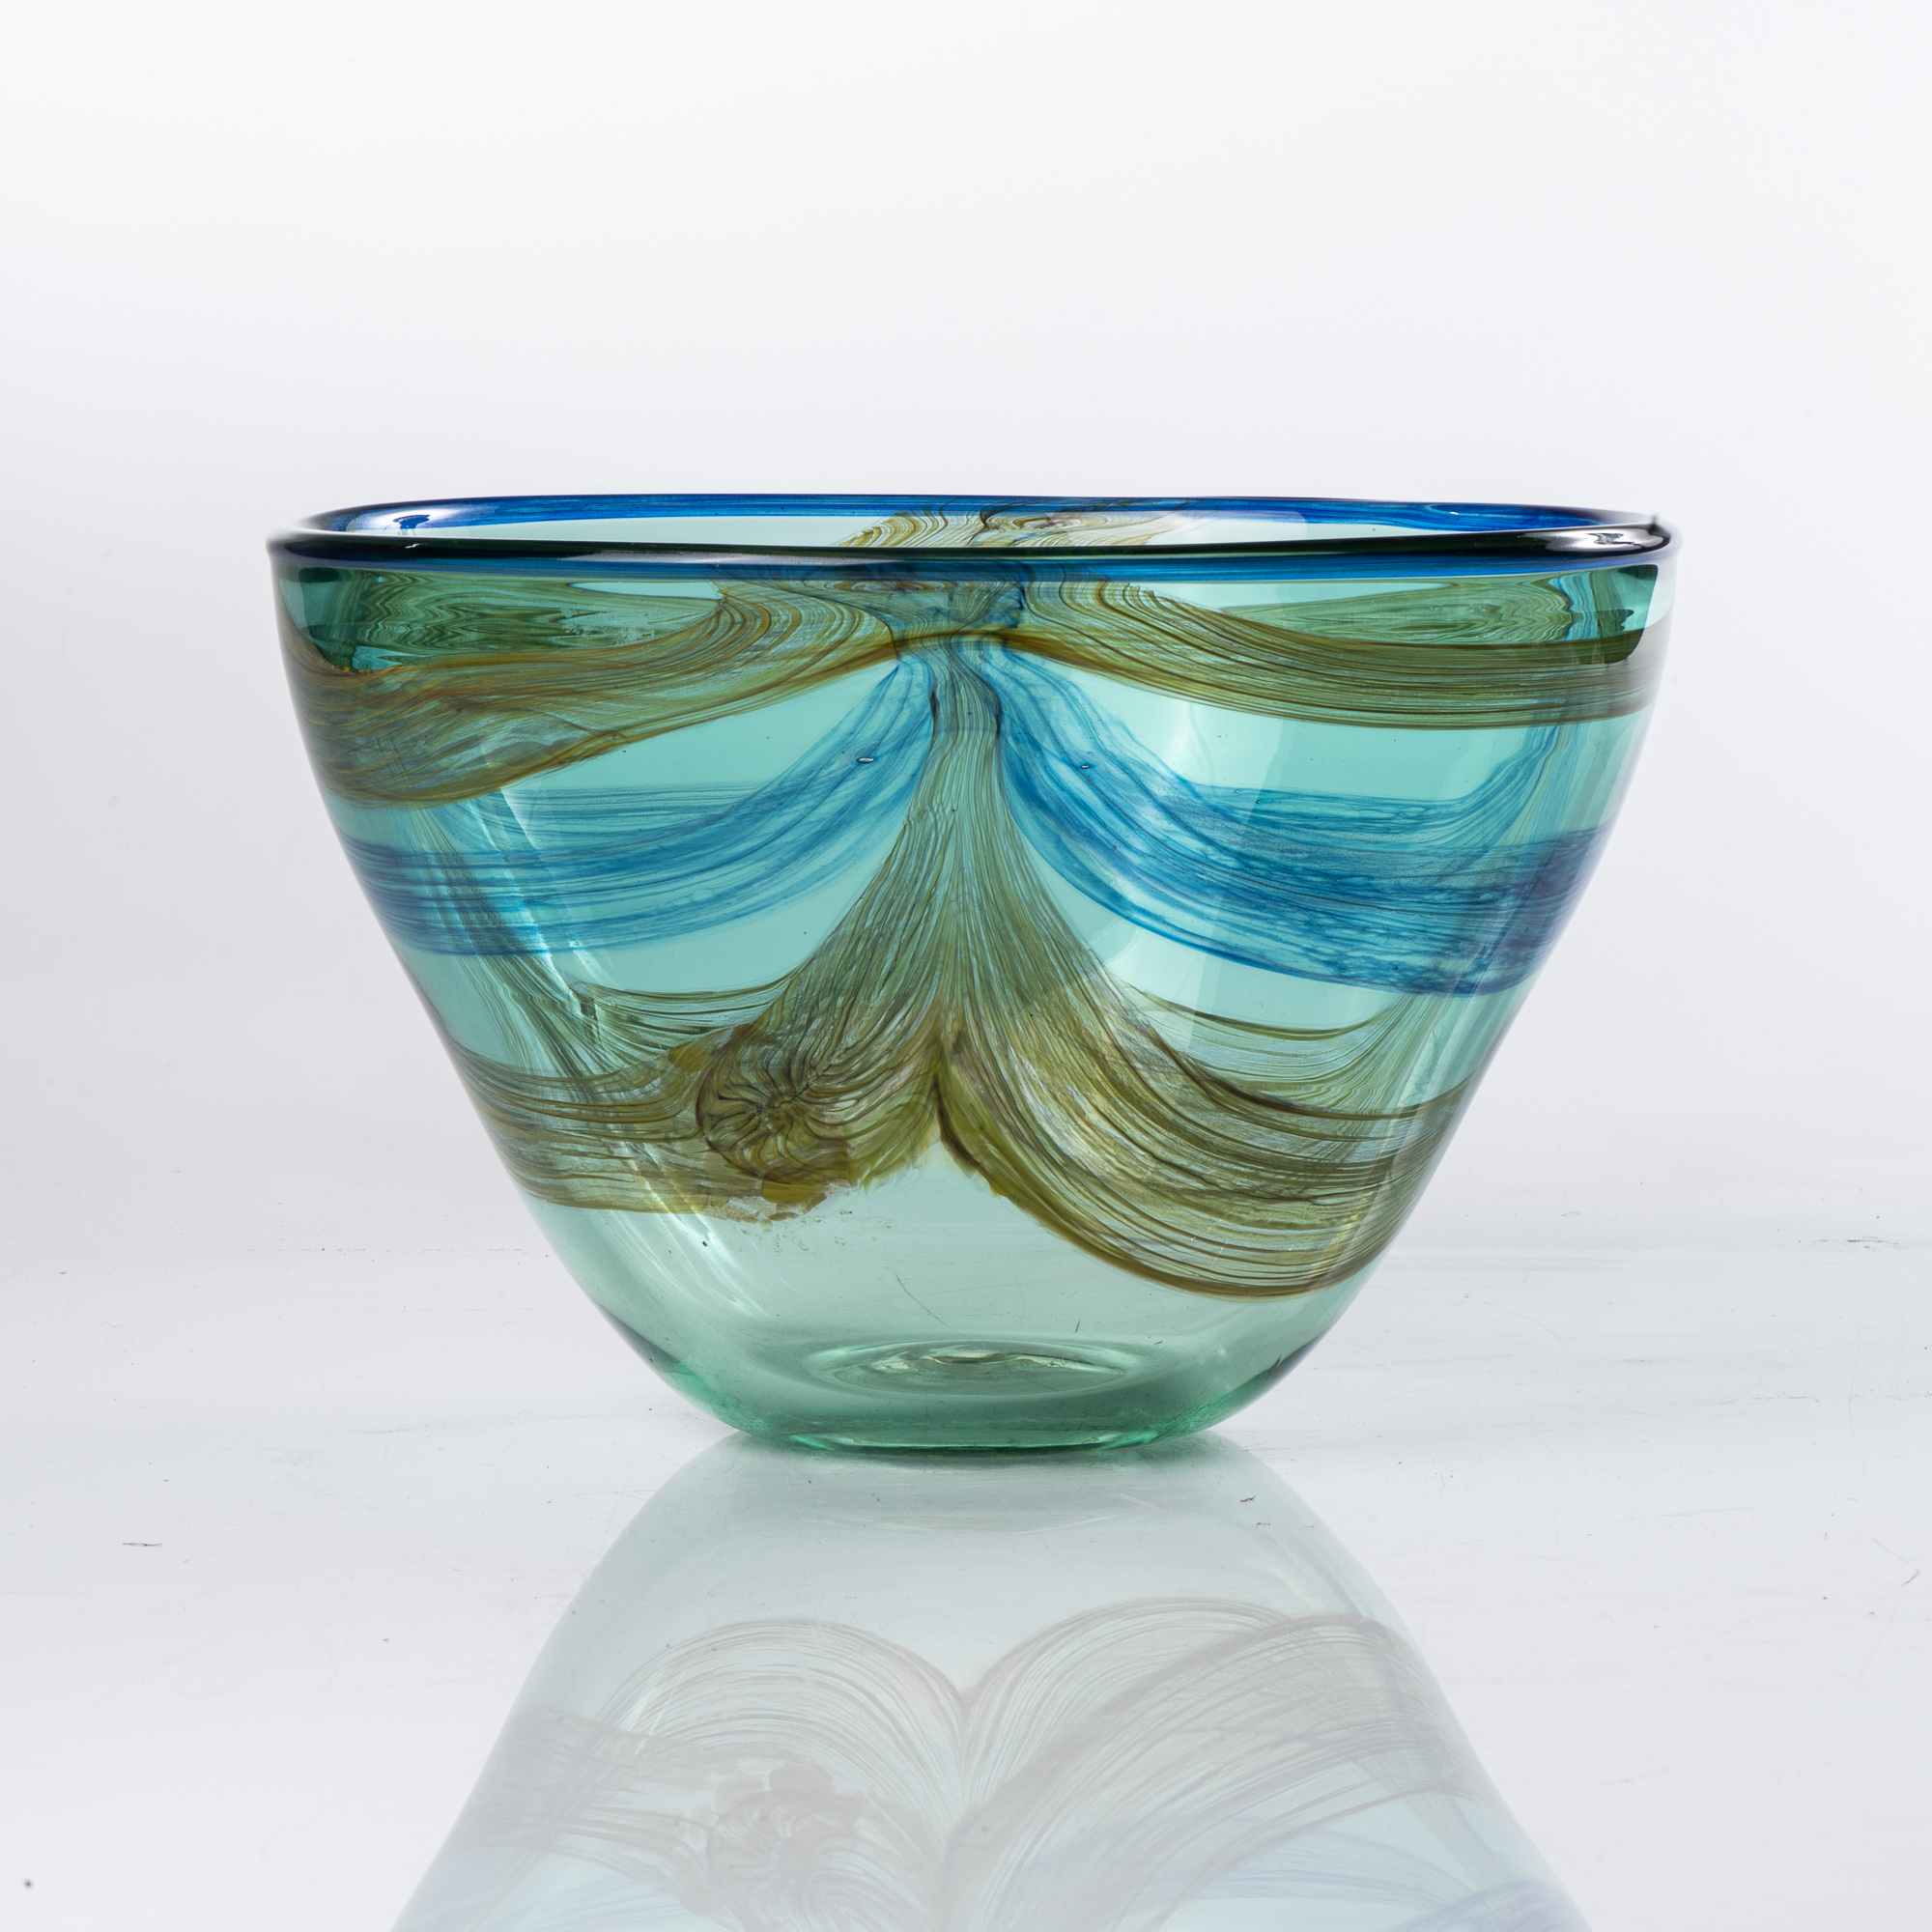 SHIRLEY CLOETE (SOUTH AFRICAN 1921 - 2010): A GLASS BOWL